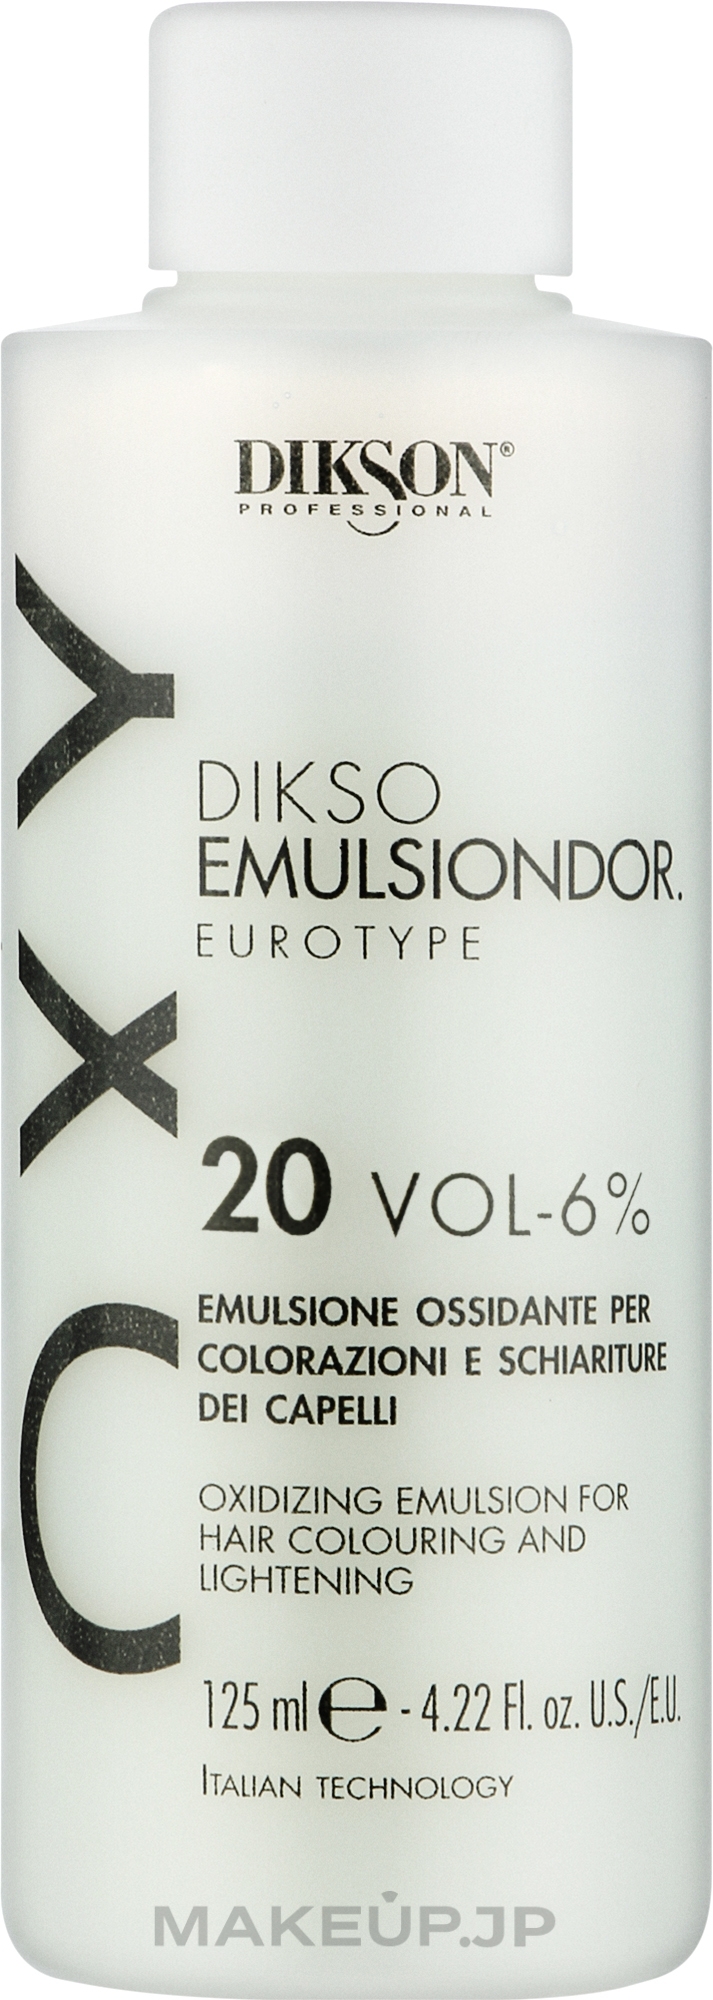 Hair Oxydant - Dikson Oxy Oxidizing Emulsion For Hair Colouring And Lightening 20 Vol-6% — photo 125 ml